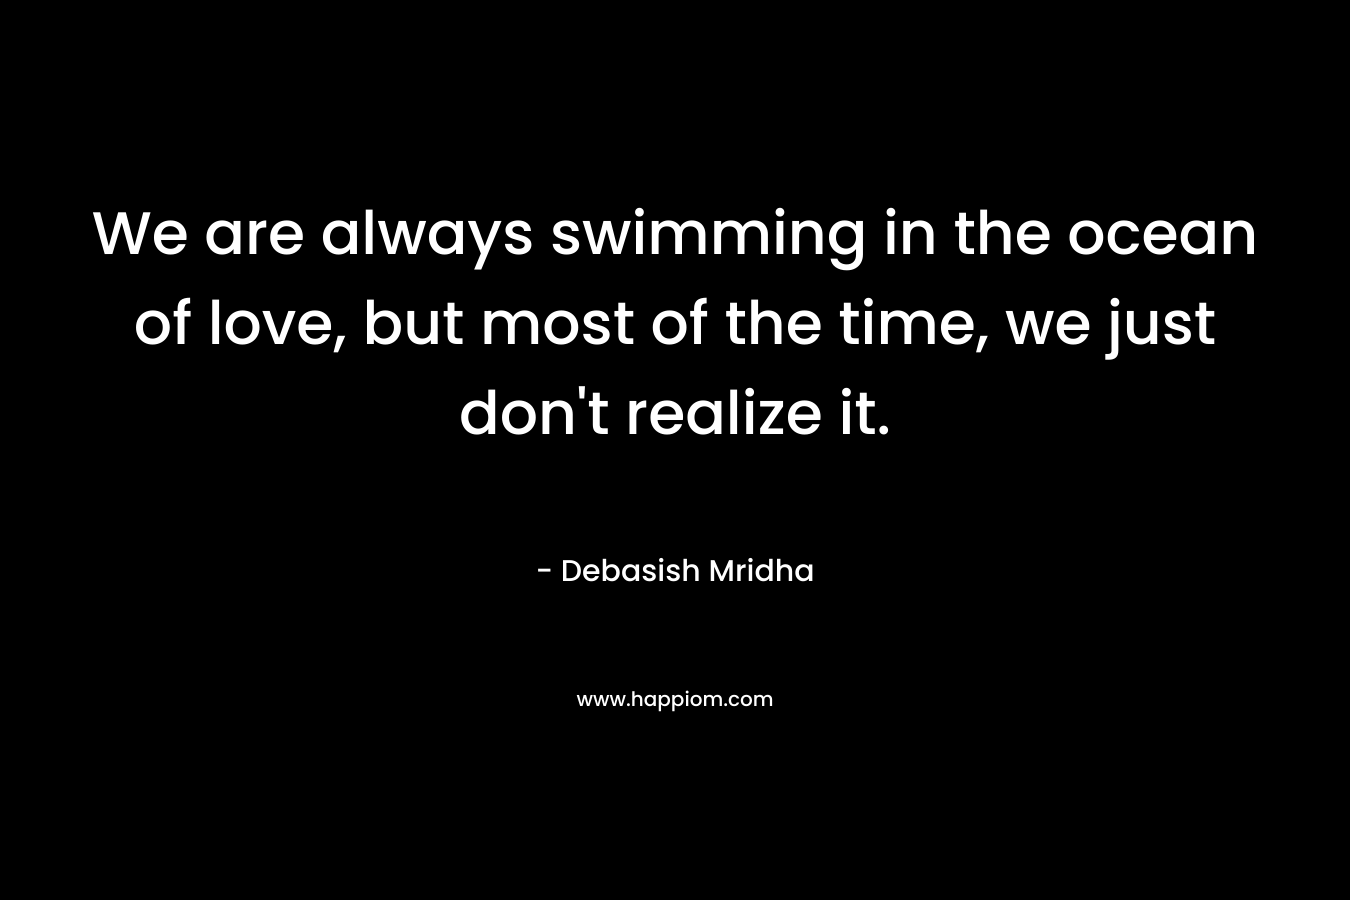 We are always swimming in the ocean of love, but most of the time, we just don’t realize it. – Debasish Mridha